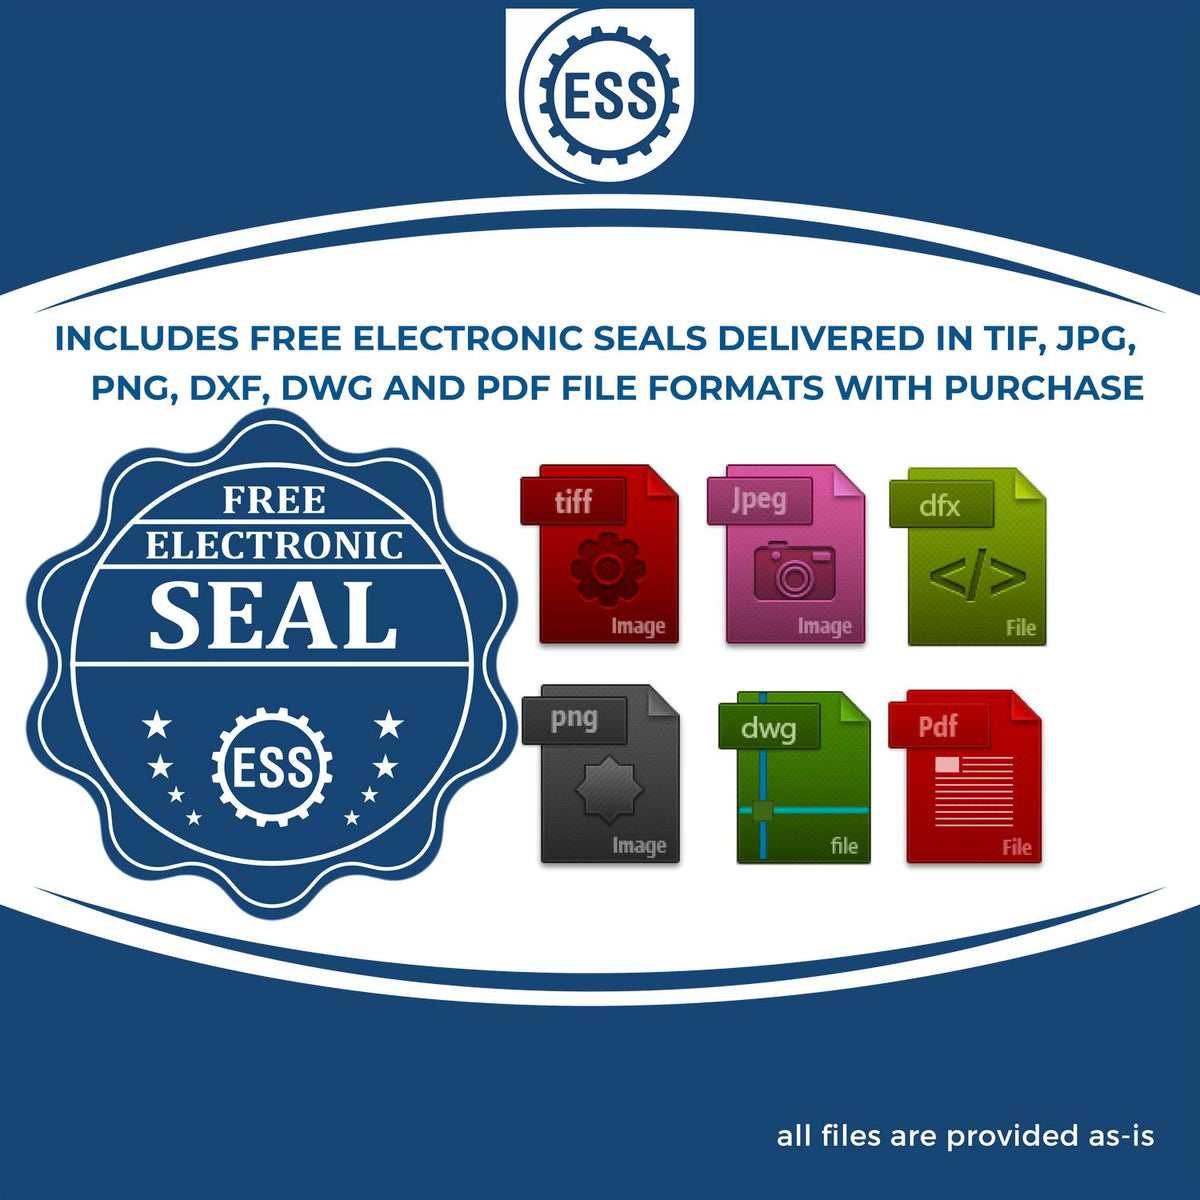 An infographic for the free electronic seal for the Gift Wyoming Land Surveyor Seal illustrating the different file type icons such as DXF, DWG, TIF, JPG and PNG.